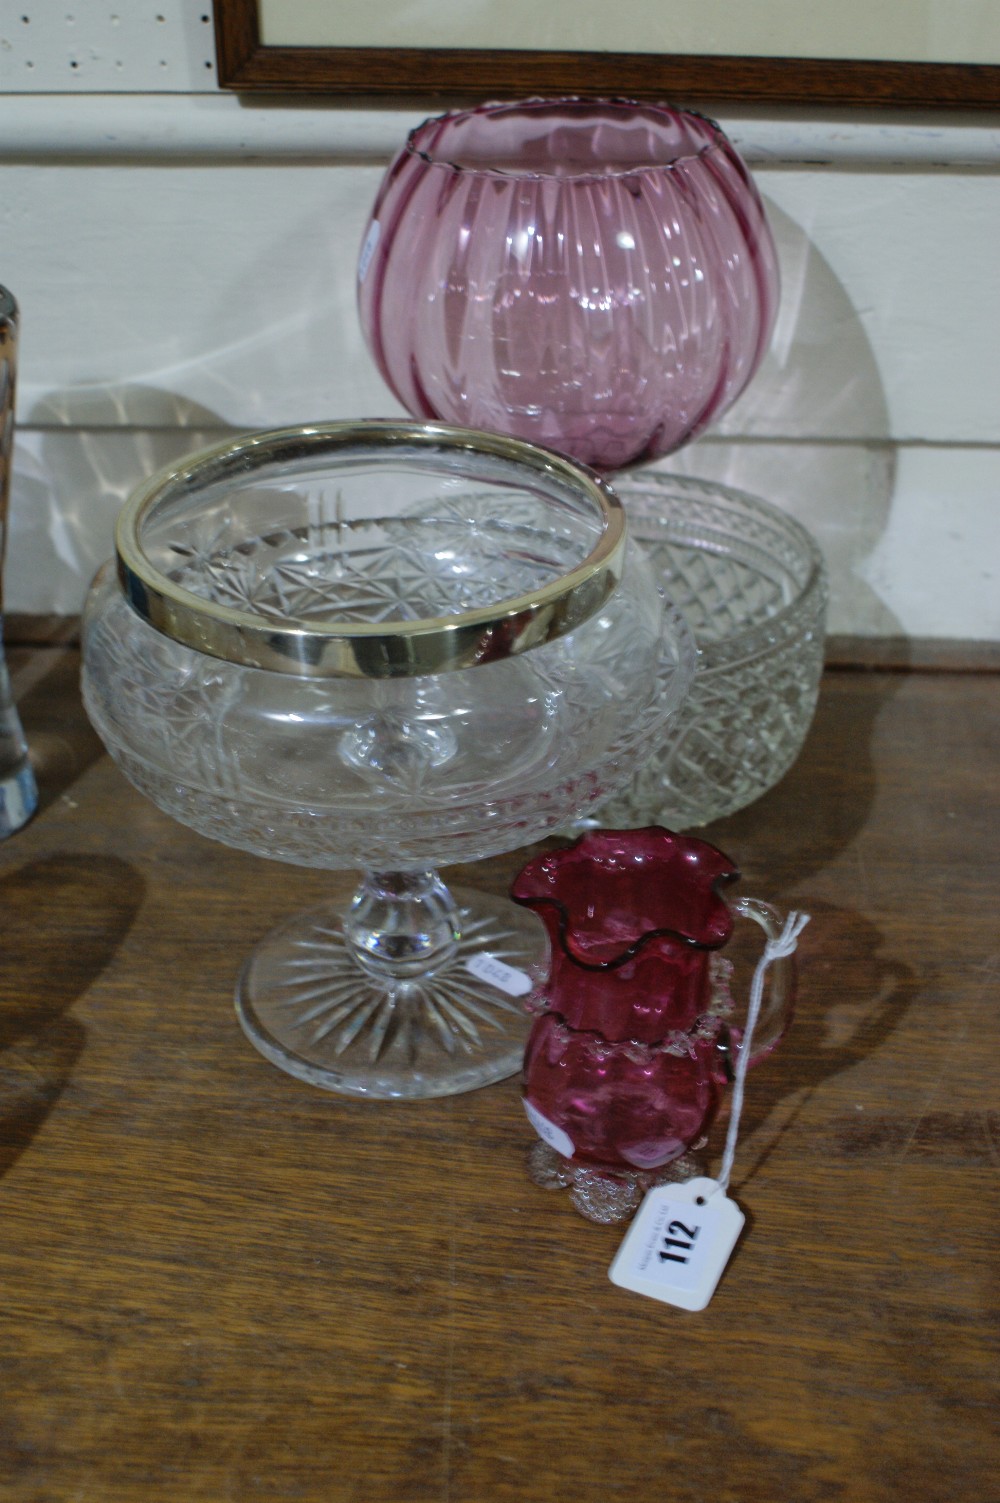 A Cranberry Tinted Cream Jug Together With An Early 20th Century Circular Salad Bowl And Servers